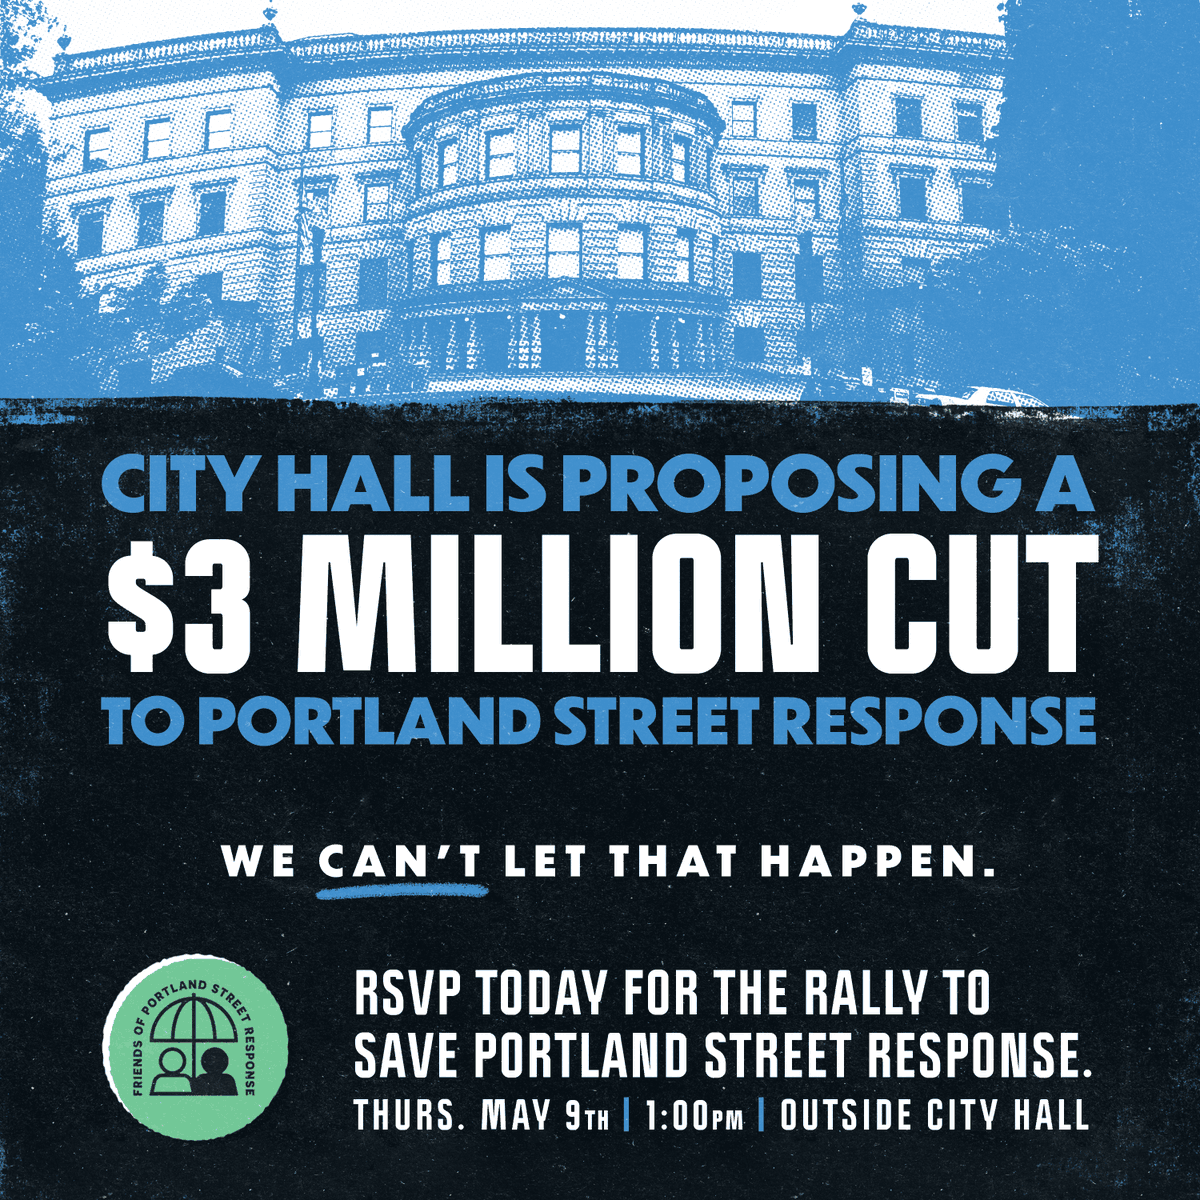 It's time to rally to Save Portland Street Response. RSVP Today: bit.ly/Rally4PSR